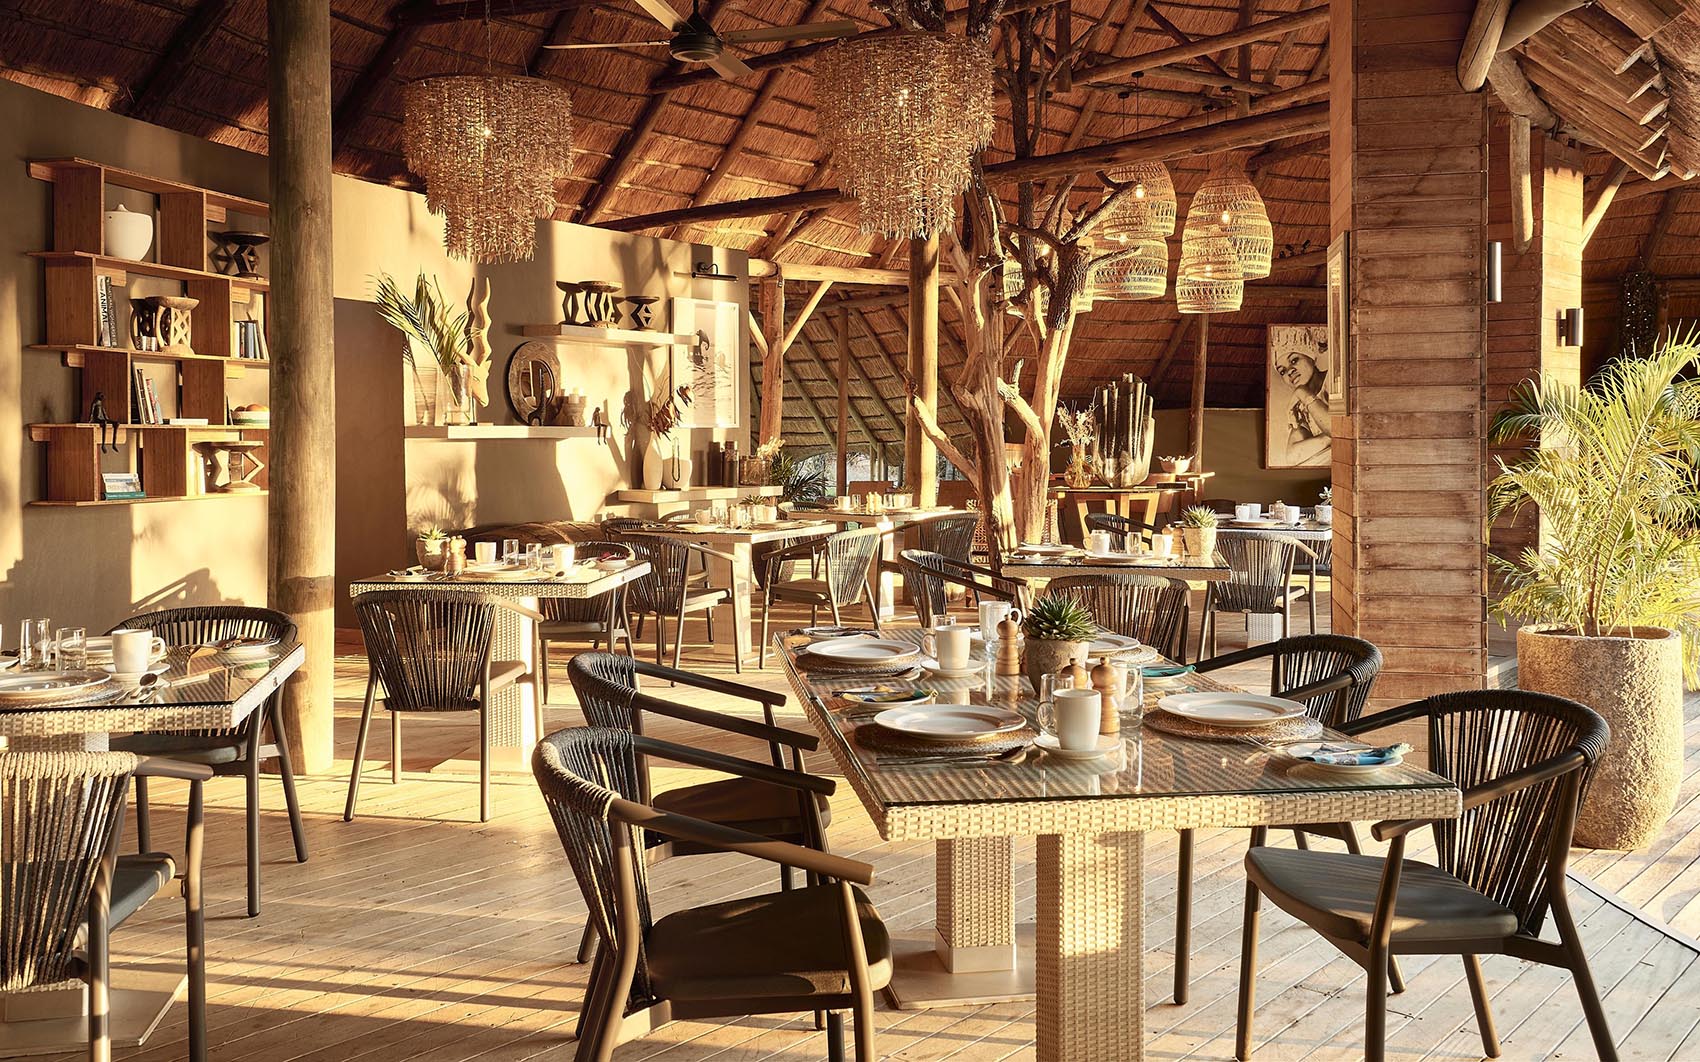 4-course set menu served in the dining area at Victoria Falls River Lodge